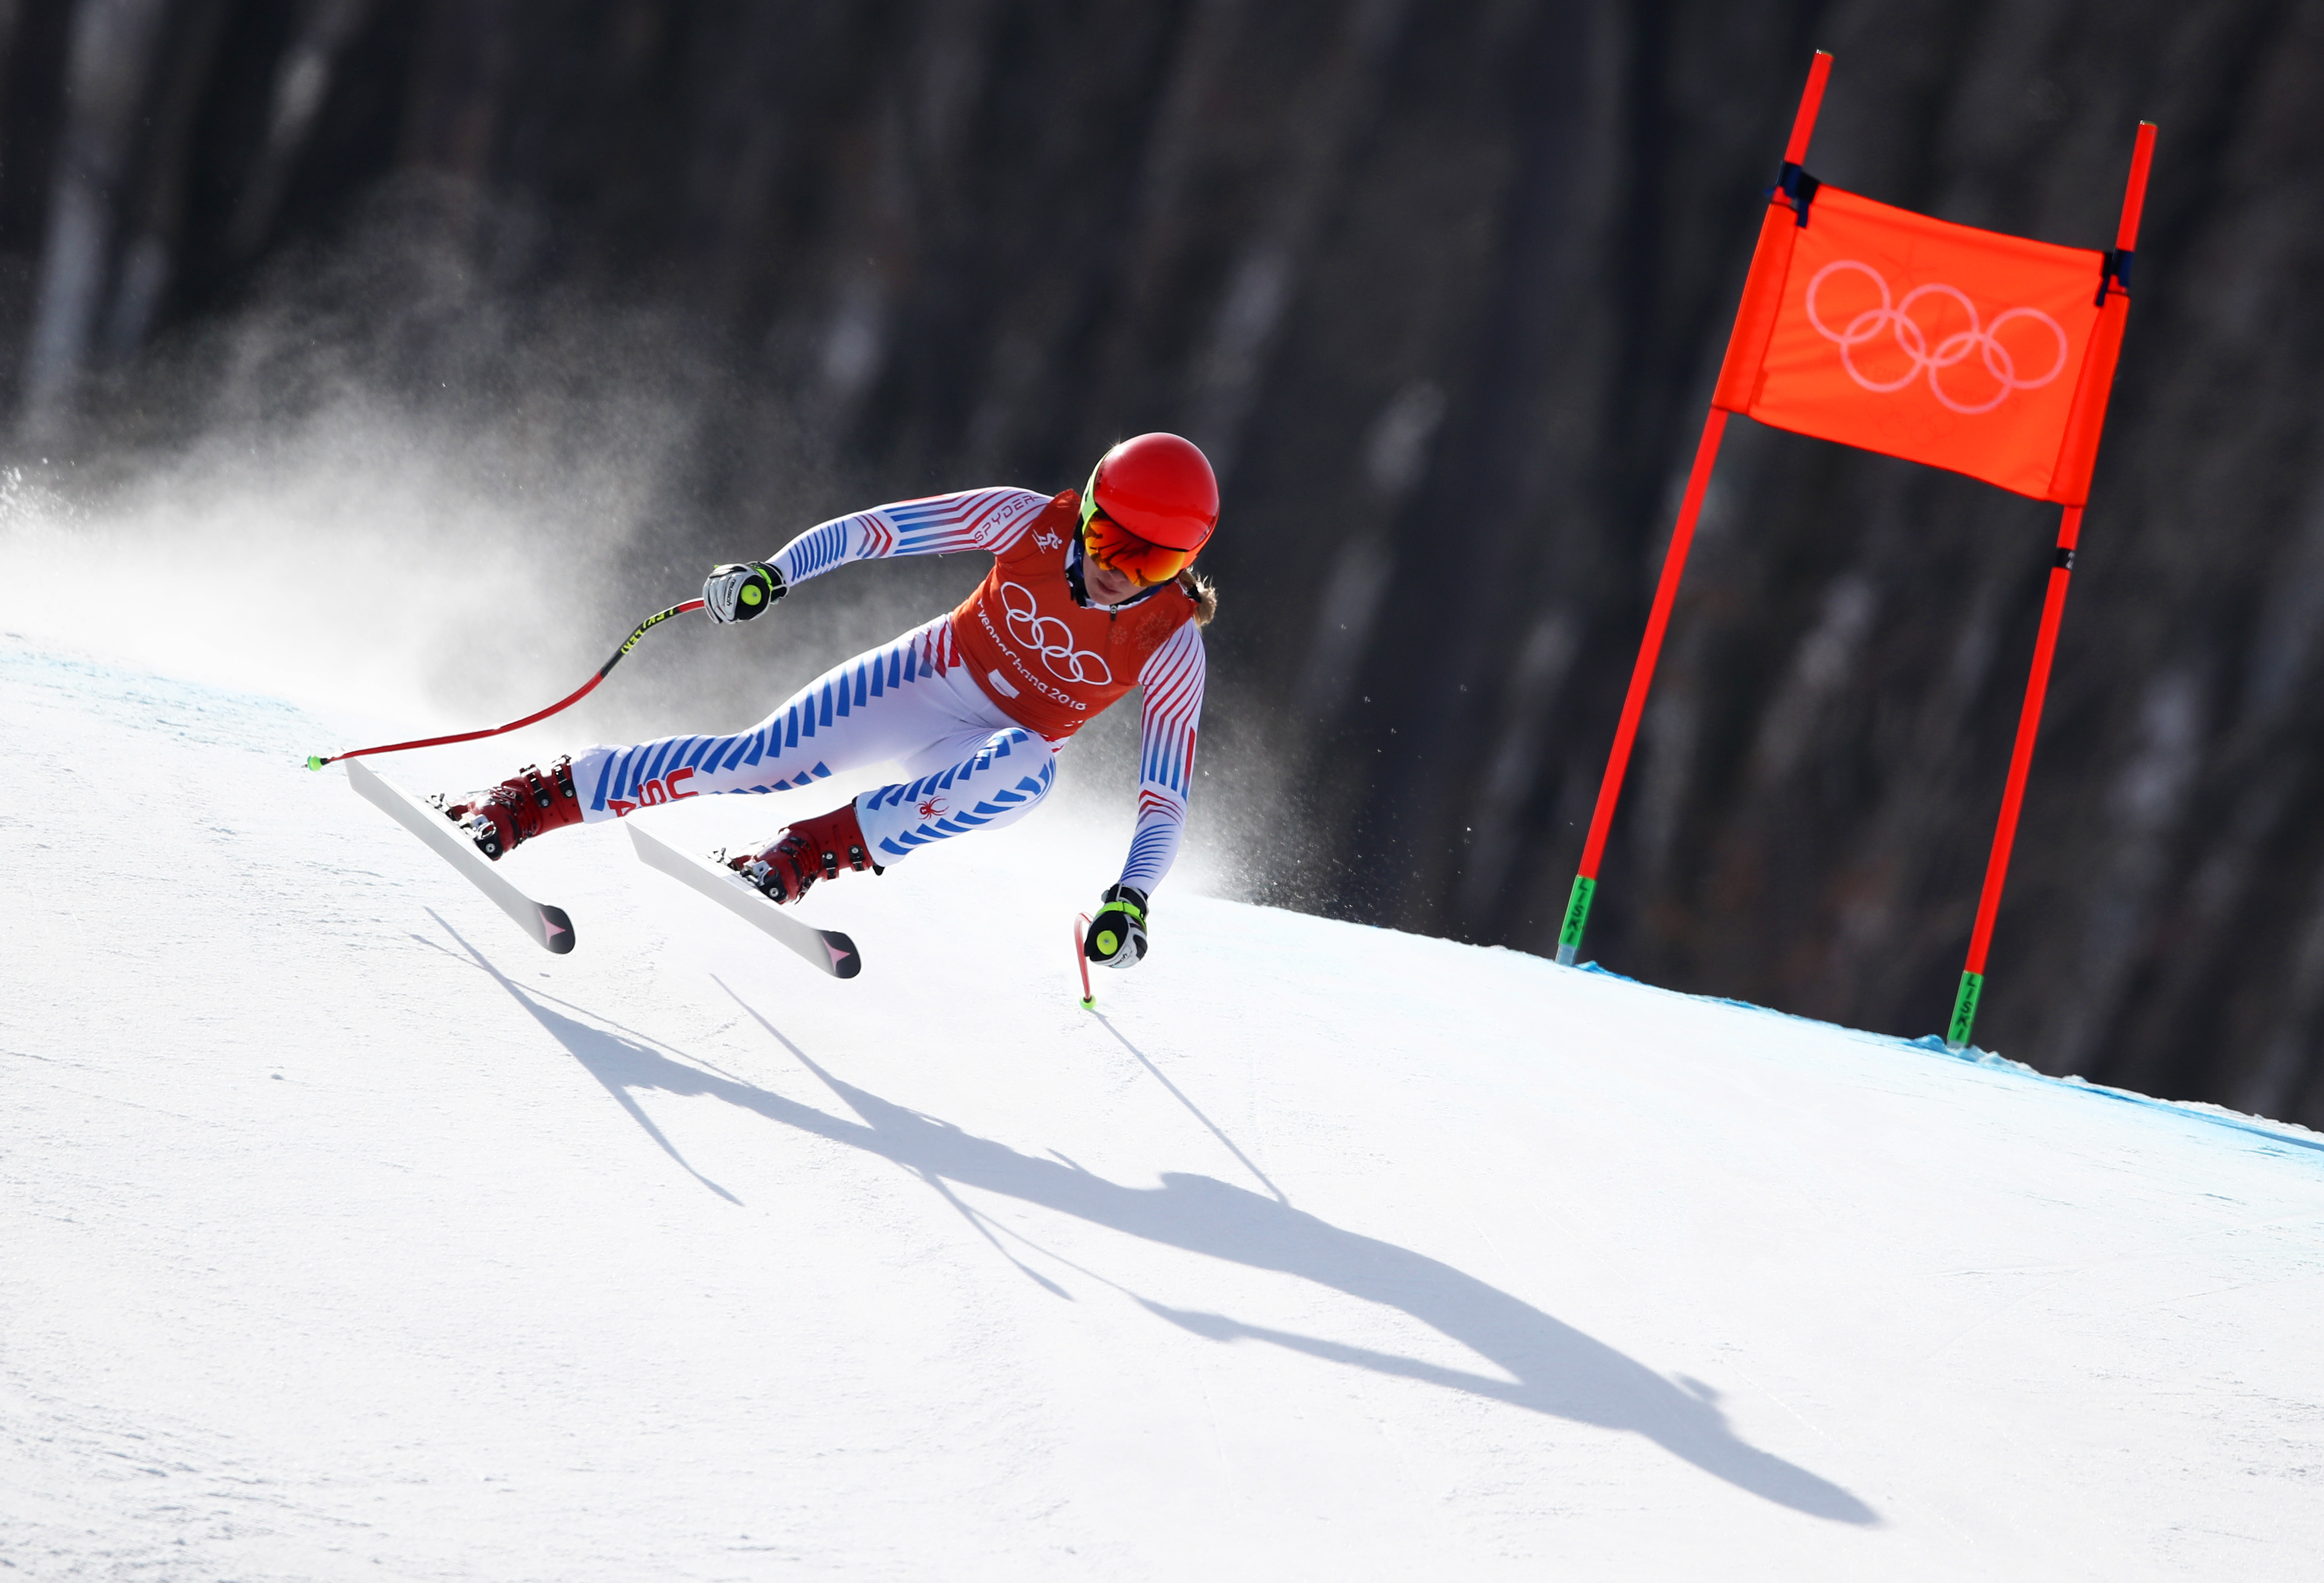 Mikaela Shiffrin competes in the second of three scheduled downhill training runs Monday. (Getty Images - Ezra Shaw)